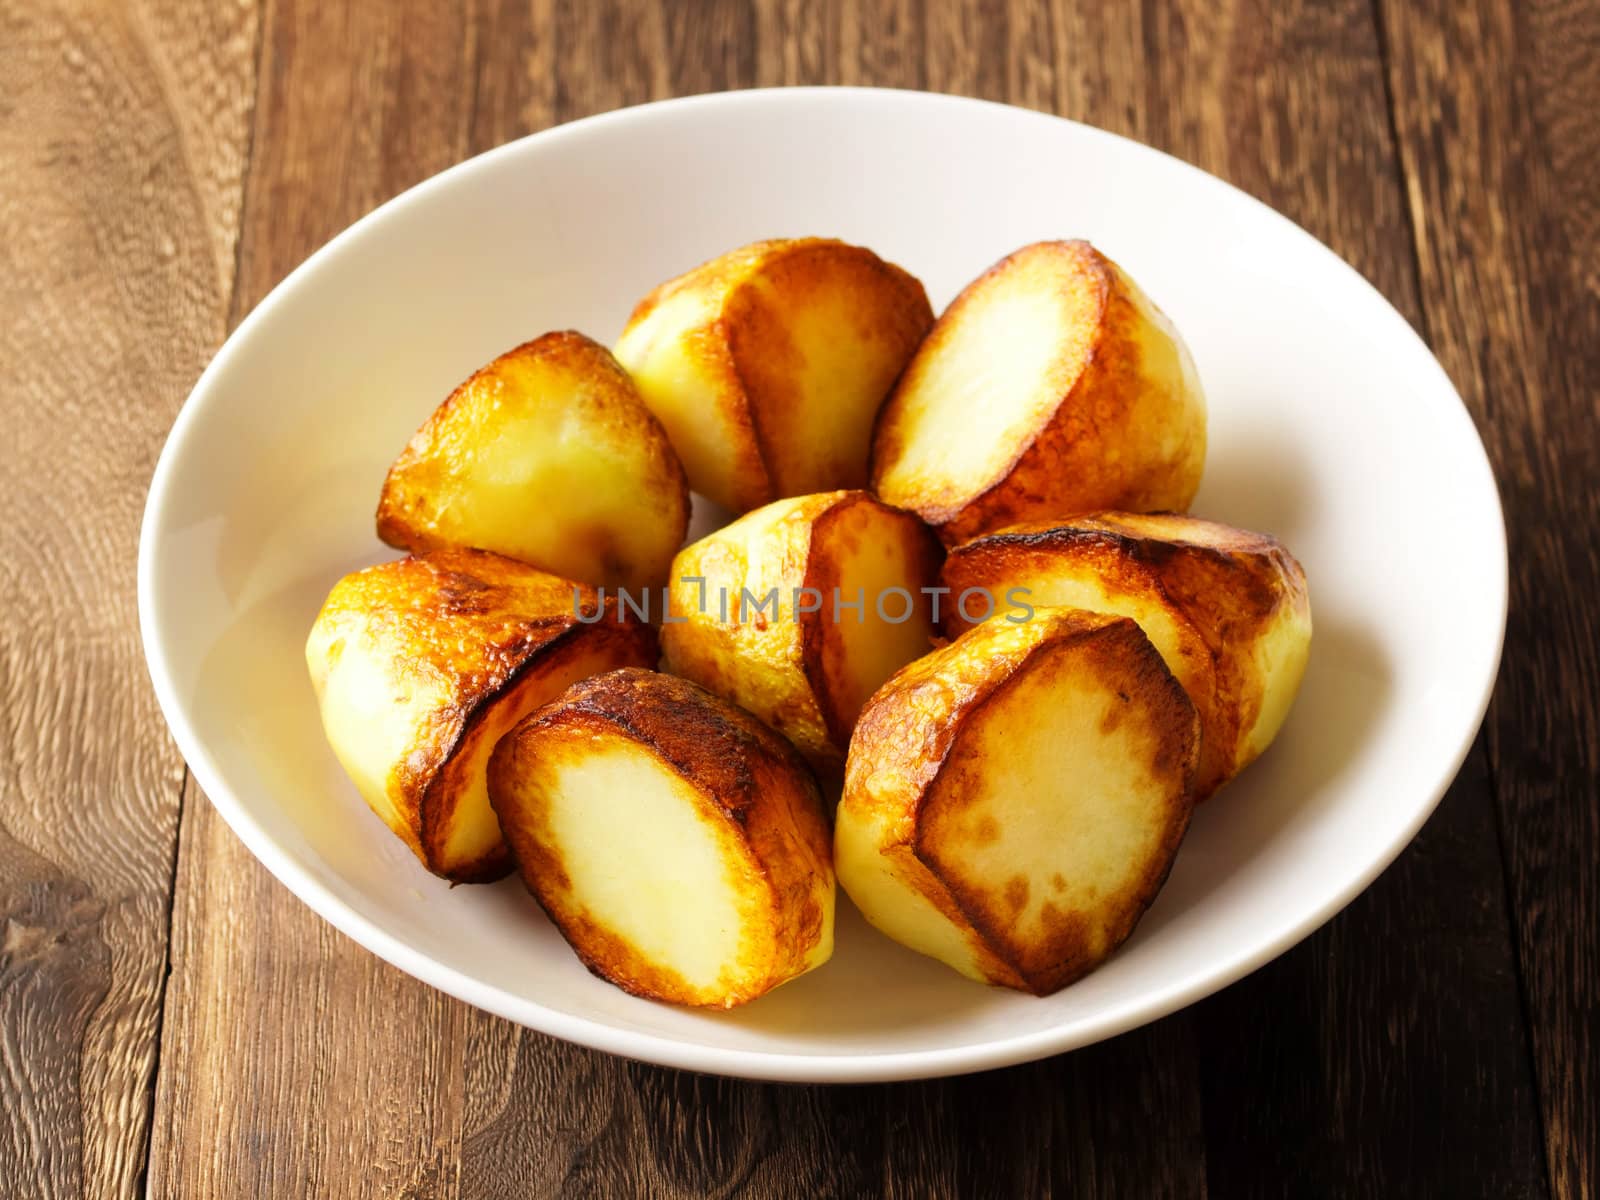 close up of a bowl of roasted potatoes